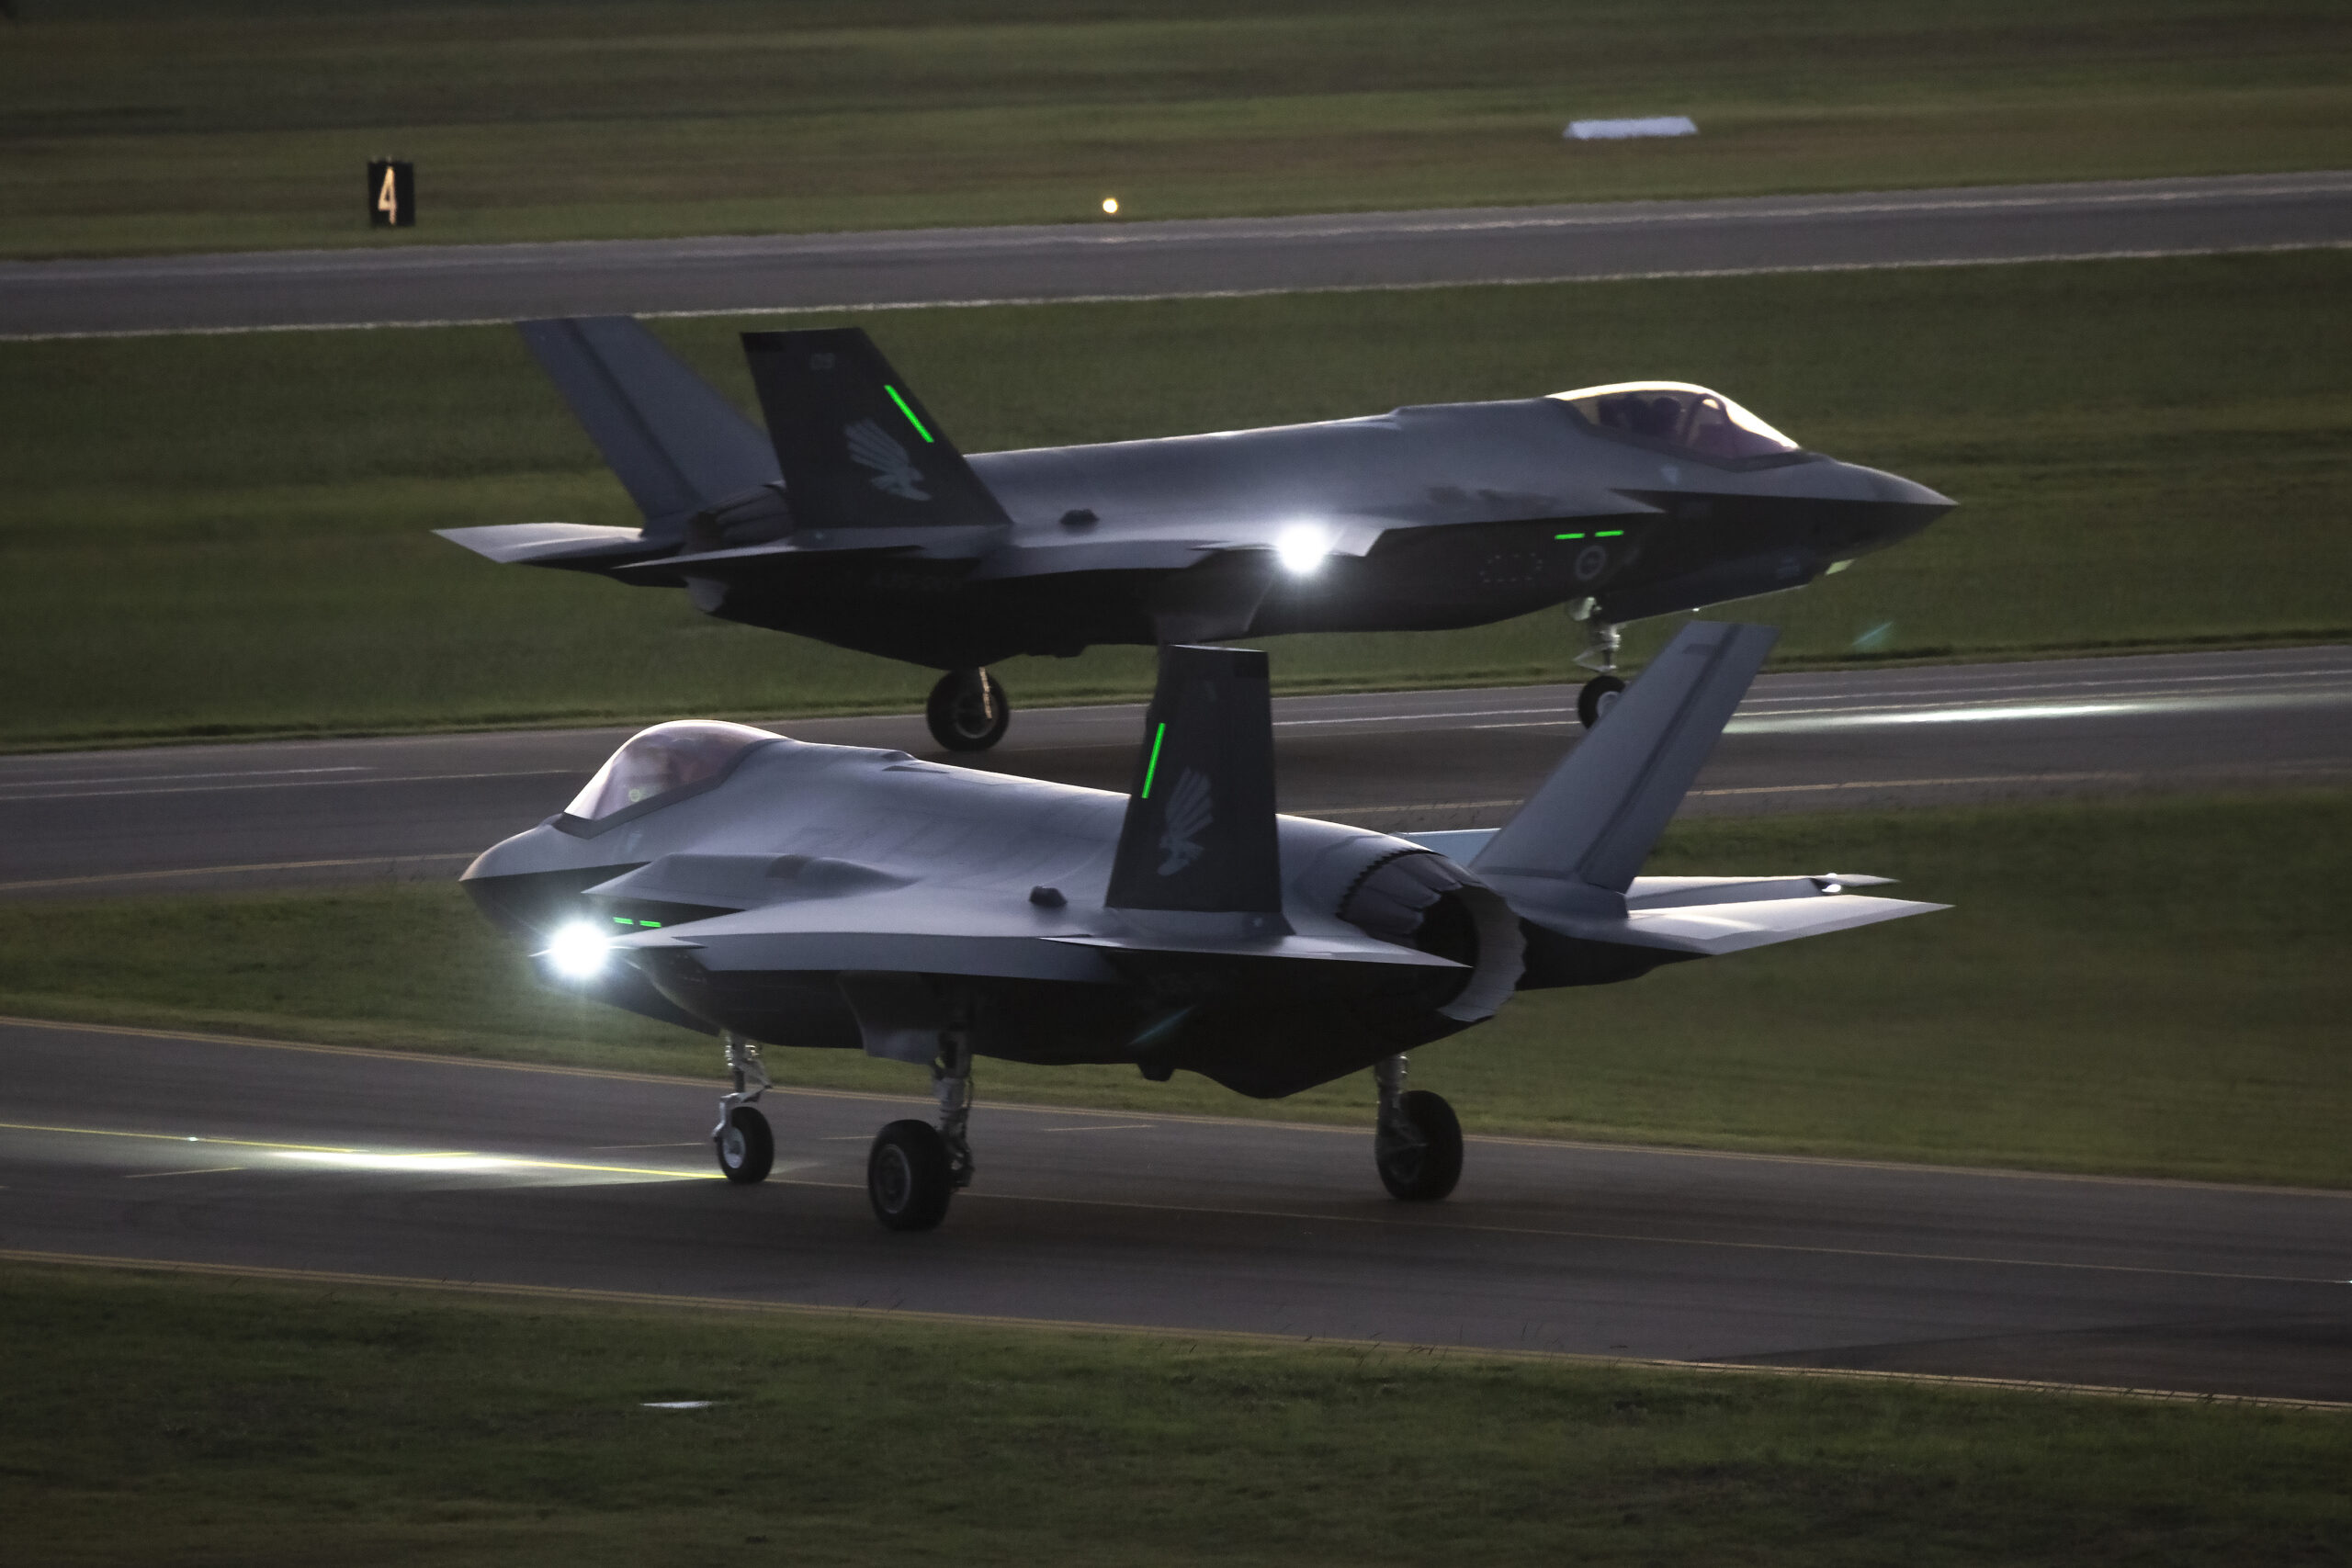 No 3 Squadron Joint Strike fighters A35-09 and A35-11 taxi out for a night sortie from RAAF Base Williamtown. *** Local Caption *** Two F-35A Joint Strike Fighter aircraft from No. 3 Squadron conducted night flying at RAAF Base Williamtown as part of pilot familiarisation training.